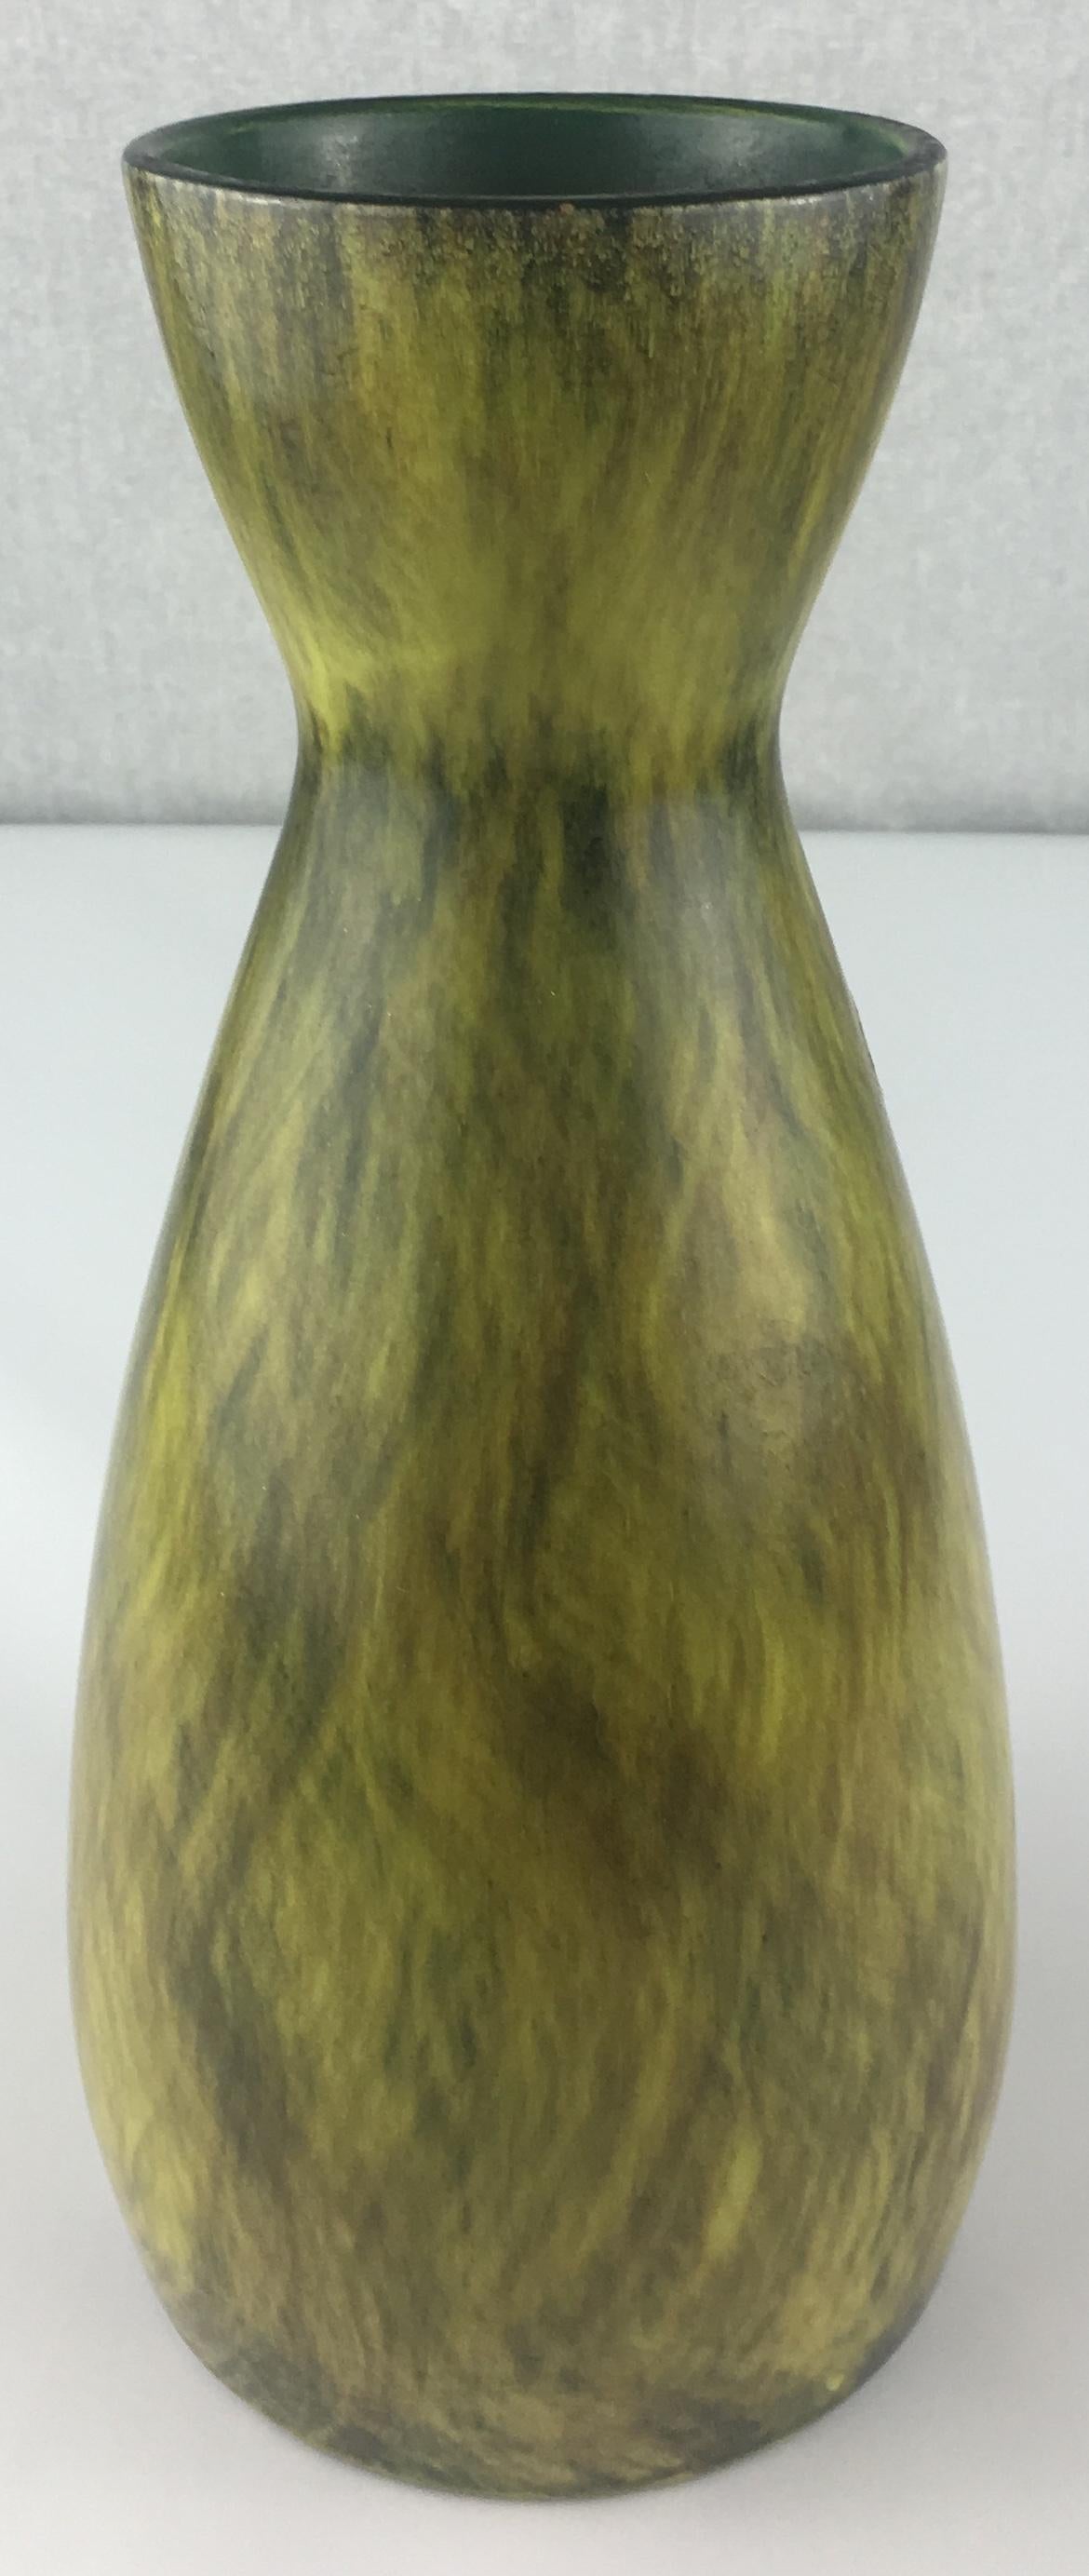 Stunning French mid-century ceramic vase by St. Clement. This gorgeous vase is very decorative has a wonderful black background with green overtones. It almost appears to be in motion like sea grasses making it very pleasing to the eye. 

Crafted in